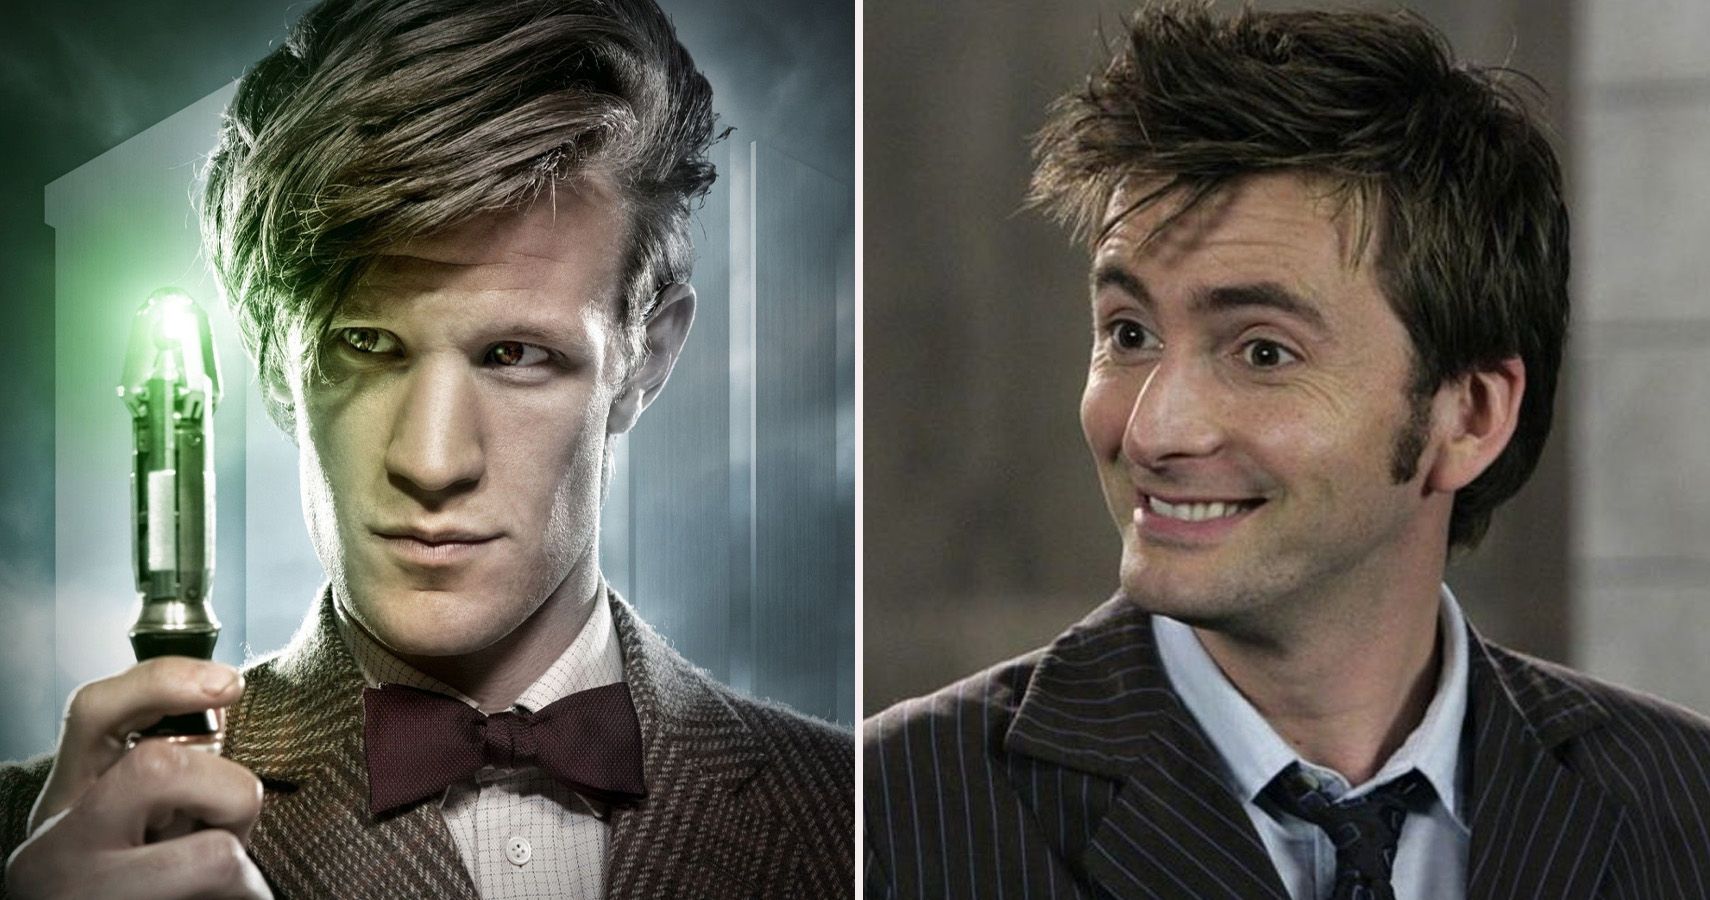 10 Hilarious Doctor Who Memes Only True Fans Will Understand